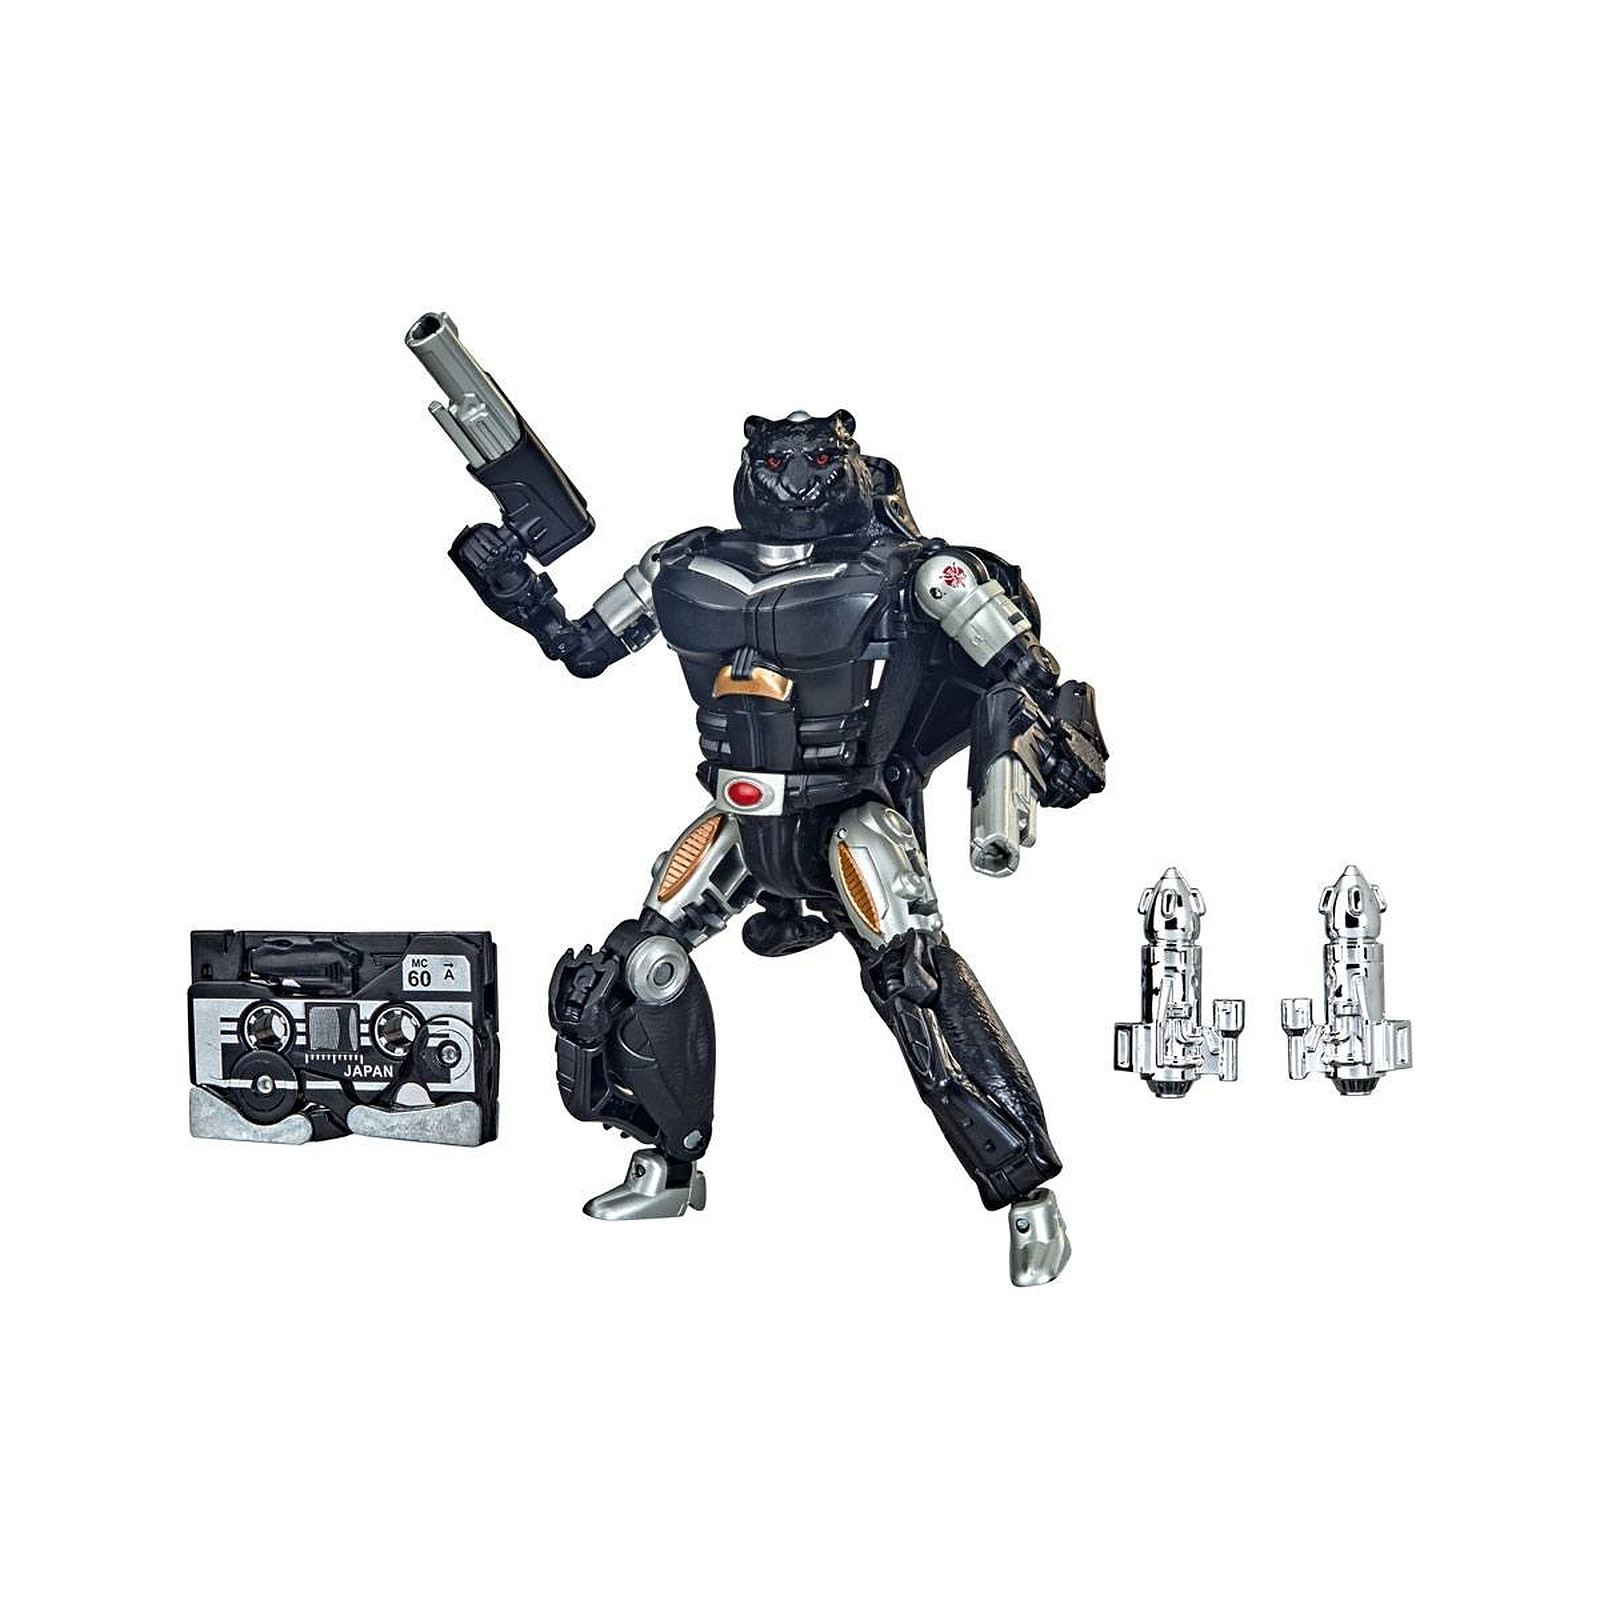 Transformers Beast Wars : WFC Deluxe - Figurine Covert Agent Ravage & Decepticon Forever Ravage - Figurines Hasbro